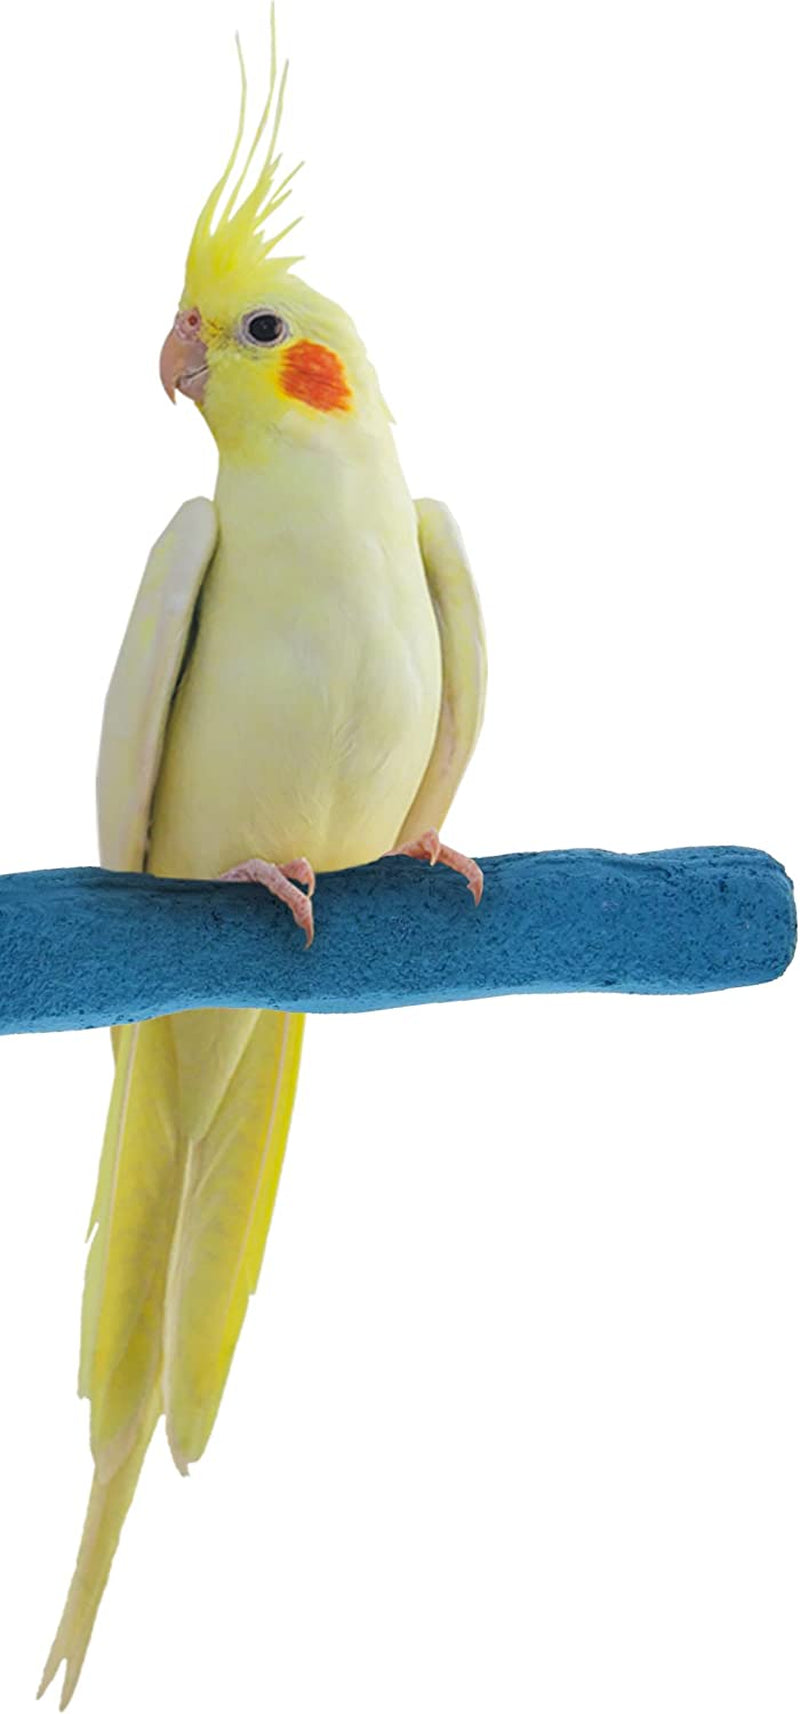 Sweet Feet and Beak Comfort Grip Safety Perch for Bird Cages - Patented Pumice Perch for Birds to Keep Nails and Beaks in Top Condition - Safe Easy to Install Bird Cage Accessories - M 8.5" Animals & Pet Supplies > Pet Supplies > Bird Supplies Sweet Feet and Beak Blue Small 6.5" 